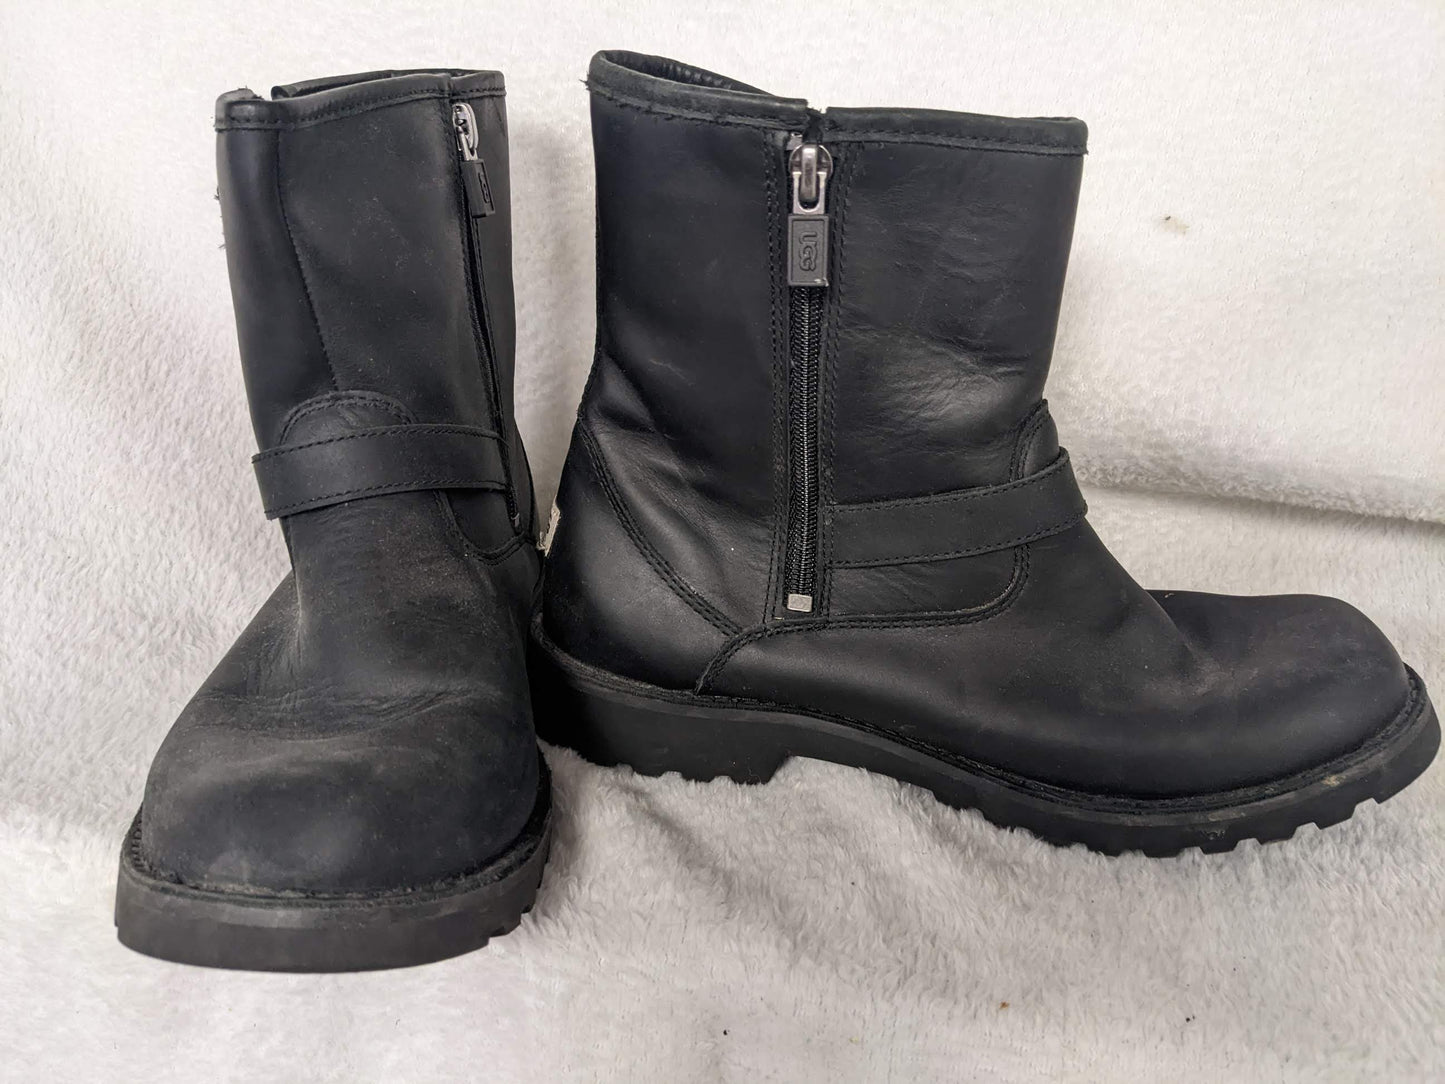 Ugg Winter Boots Size 5 Color Black Condition Used